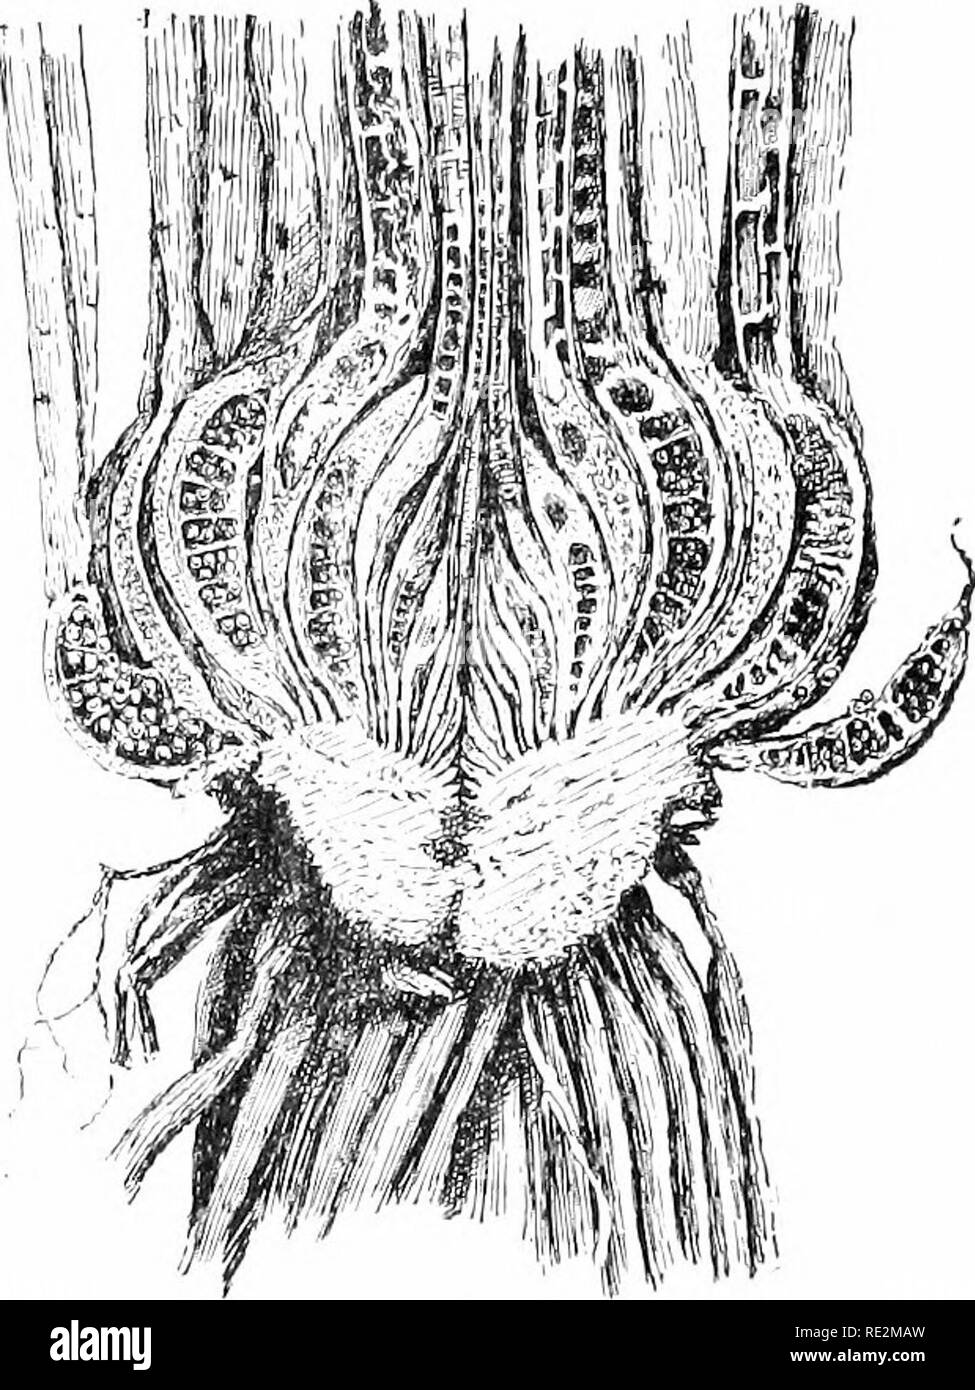 . Elementary botany. Botany. Fig. 337. Fig-33S. Base of leaf of isoetes, Section of plant of Isoetes engelmanii, showing cup- showing sporan,t&lt;ium with shaped stem, and longitudinal sections of the sporan- macrospoi-cs. (Isoetes en- gia in the thickened bases of the leaves, gelmannii.) ure from the other portions of the leaf. This is a sporangium. Beside the spores on the inside of the sporangium, there are strands of sterile tissue which extend across the cavity. This is peculiar to isoetes of all the members of the class of jilants to which the ferns belong, but it will be remembered that Stock Photo